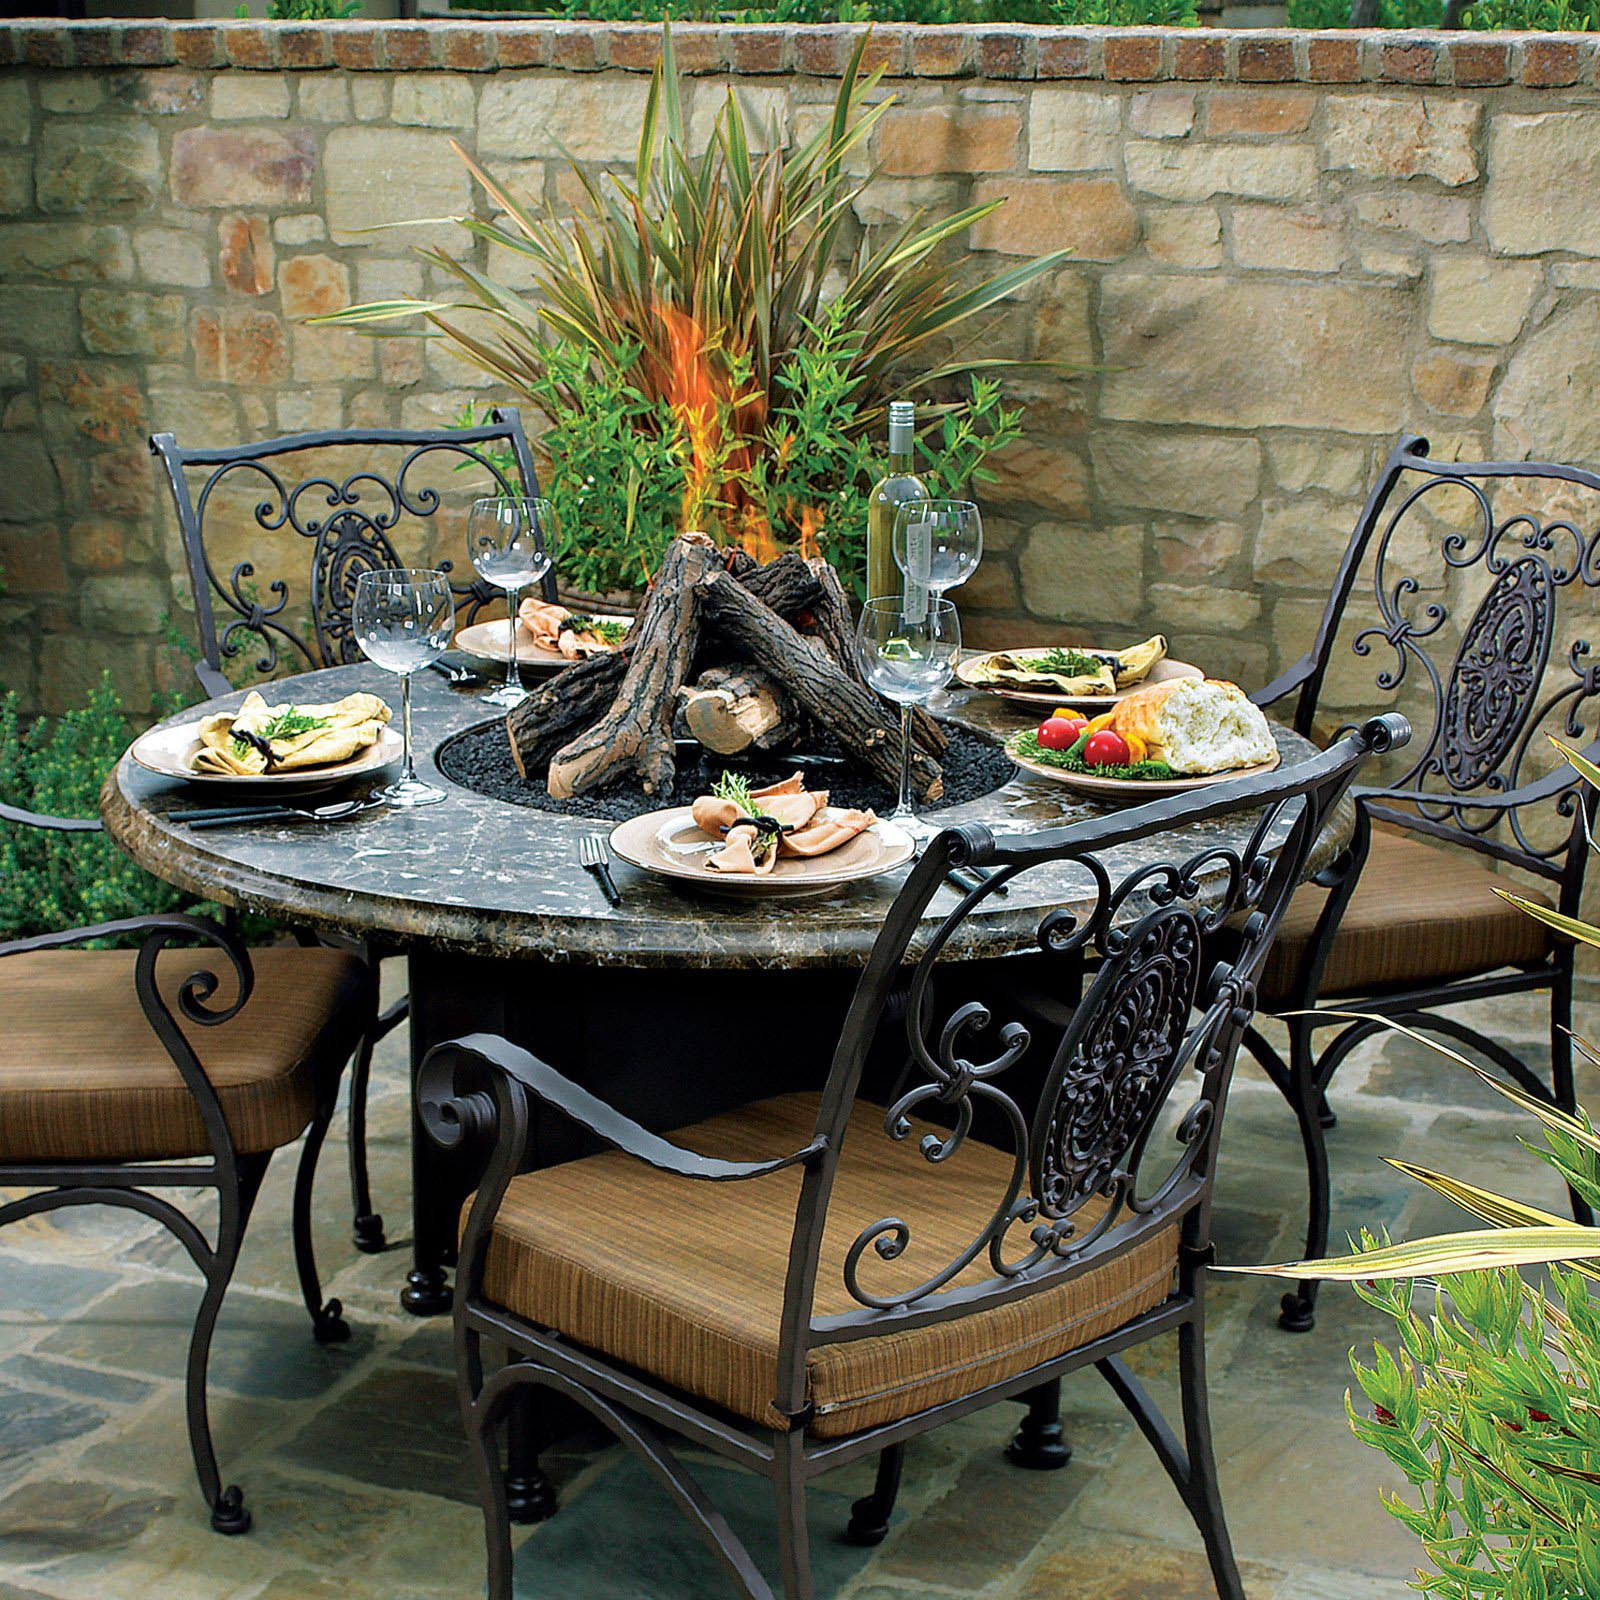 Patio Table With Fire Pit
 Patio with Fire Pit is a Nice Place to Spend Your Time